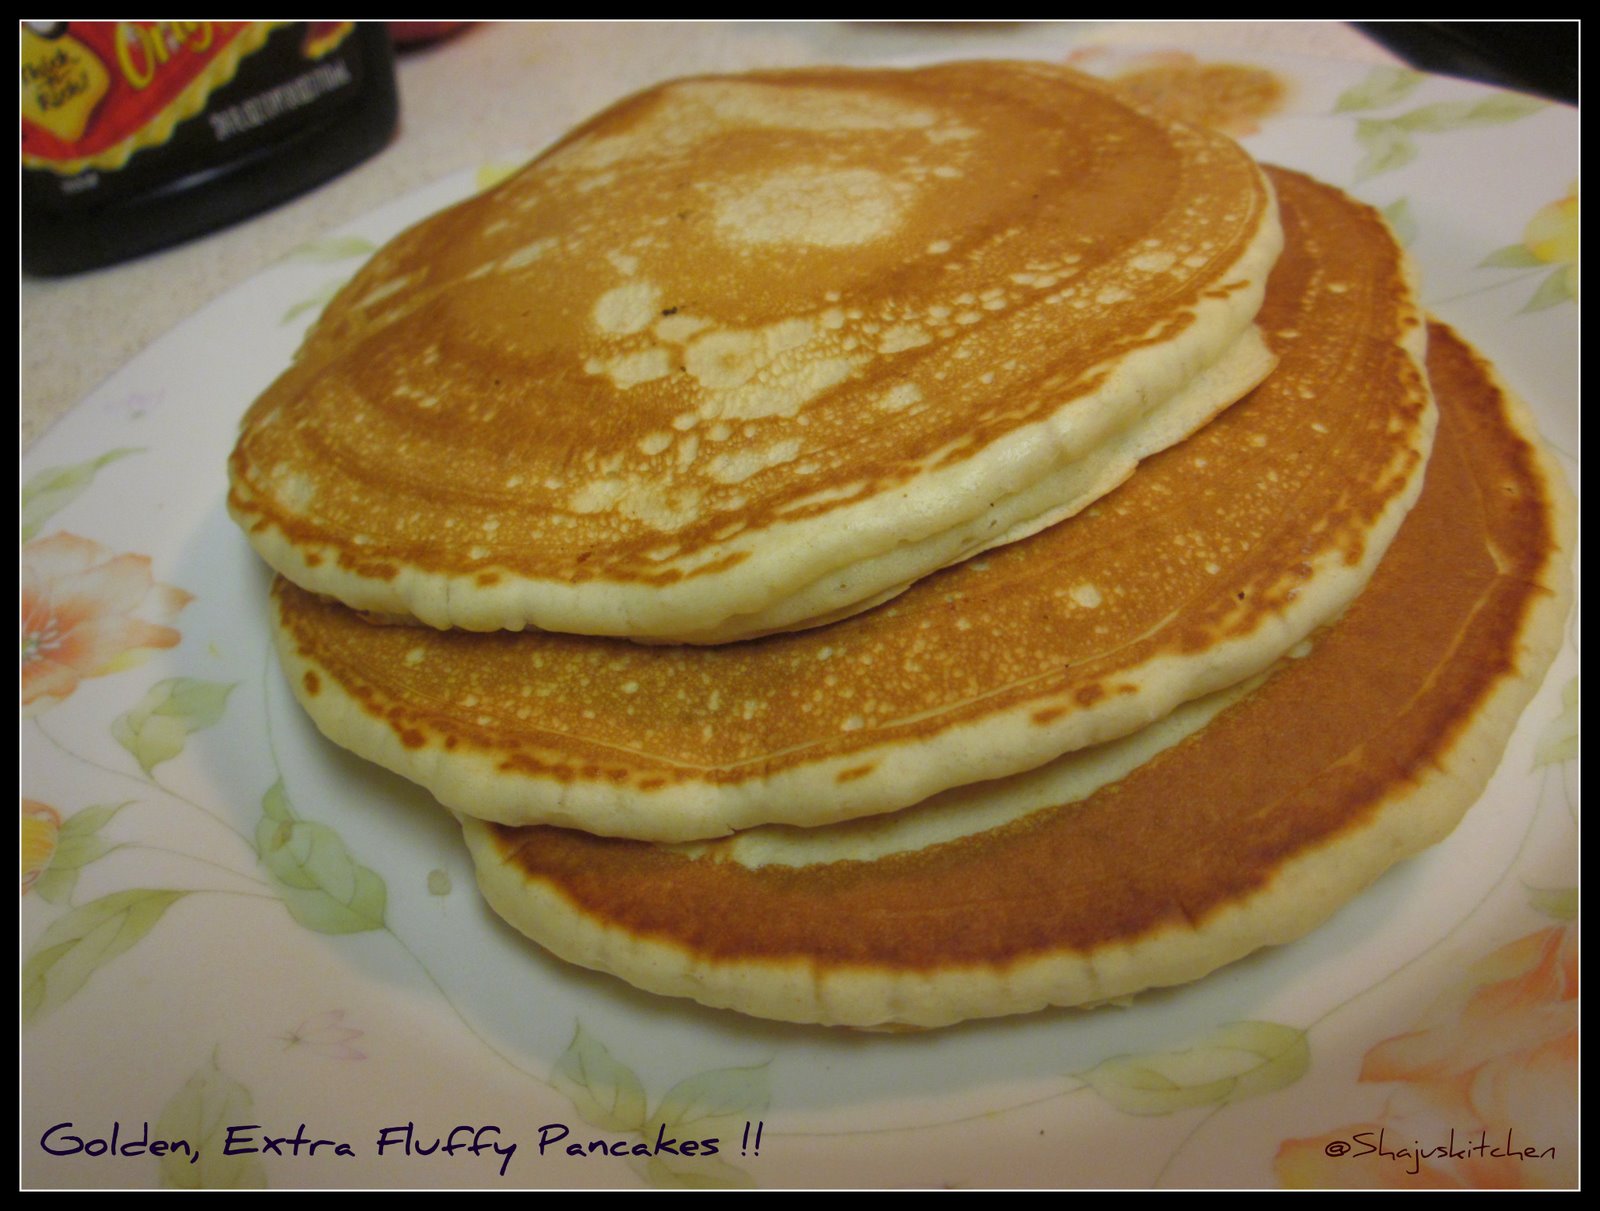 how midnight mmm fluffy  to pancakes golden pancakes evening pancakes or some snack pancakes yumm make